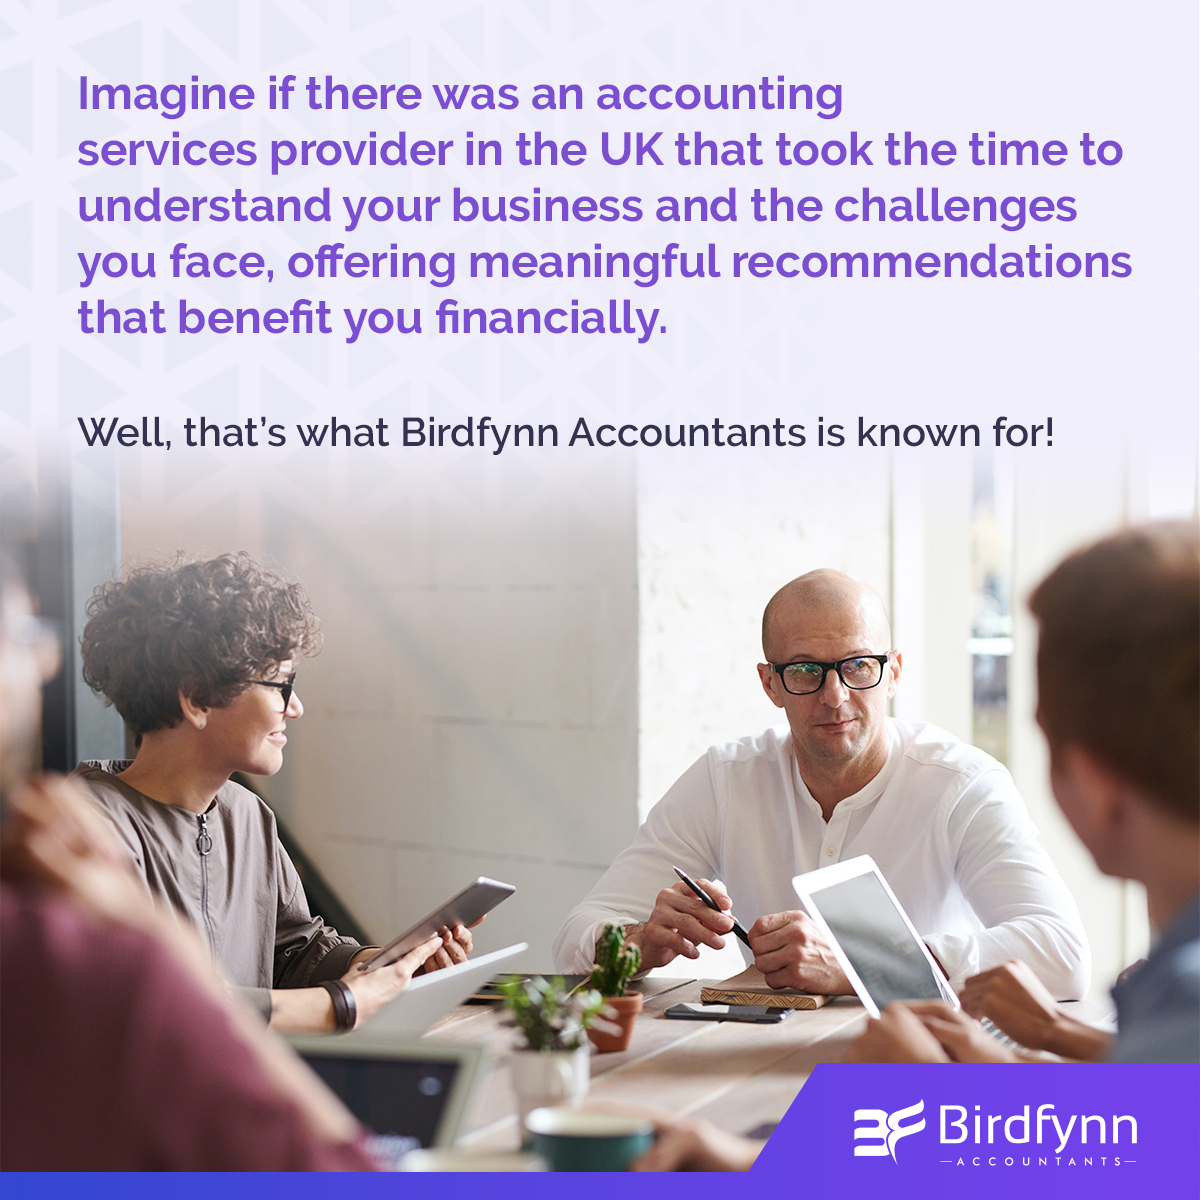 Through our wide range of accounting, tax planning, financial and support services, we empower not just businesses but also people to scale new heights of success. Find out more: birdfynn.co.uk  #UKAccountants 

#UKTax #SmallBusinessAccounting #AccountingSoftware